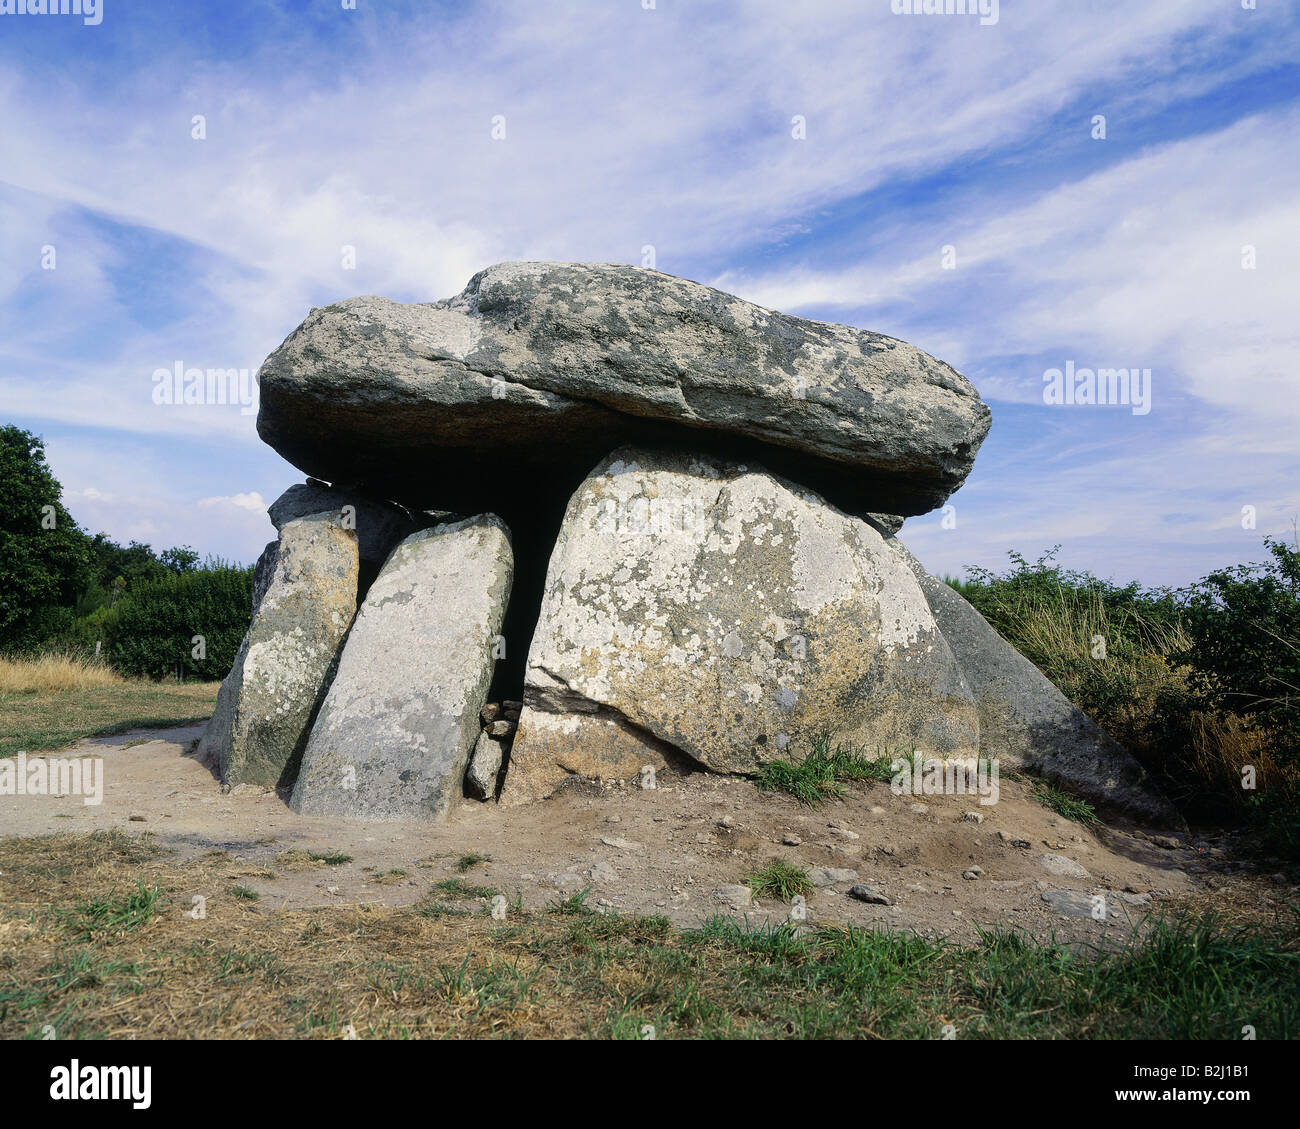 aeon, architecture, dolmen, megalithic tomb, Departement Finistere, Bretagne, France, historic, historical, stone age, craft, neolithic, megaliths, grave, burial site, tomb, Stock Photo